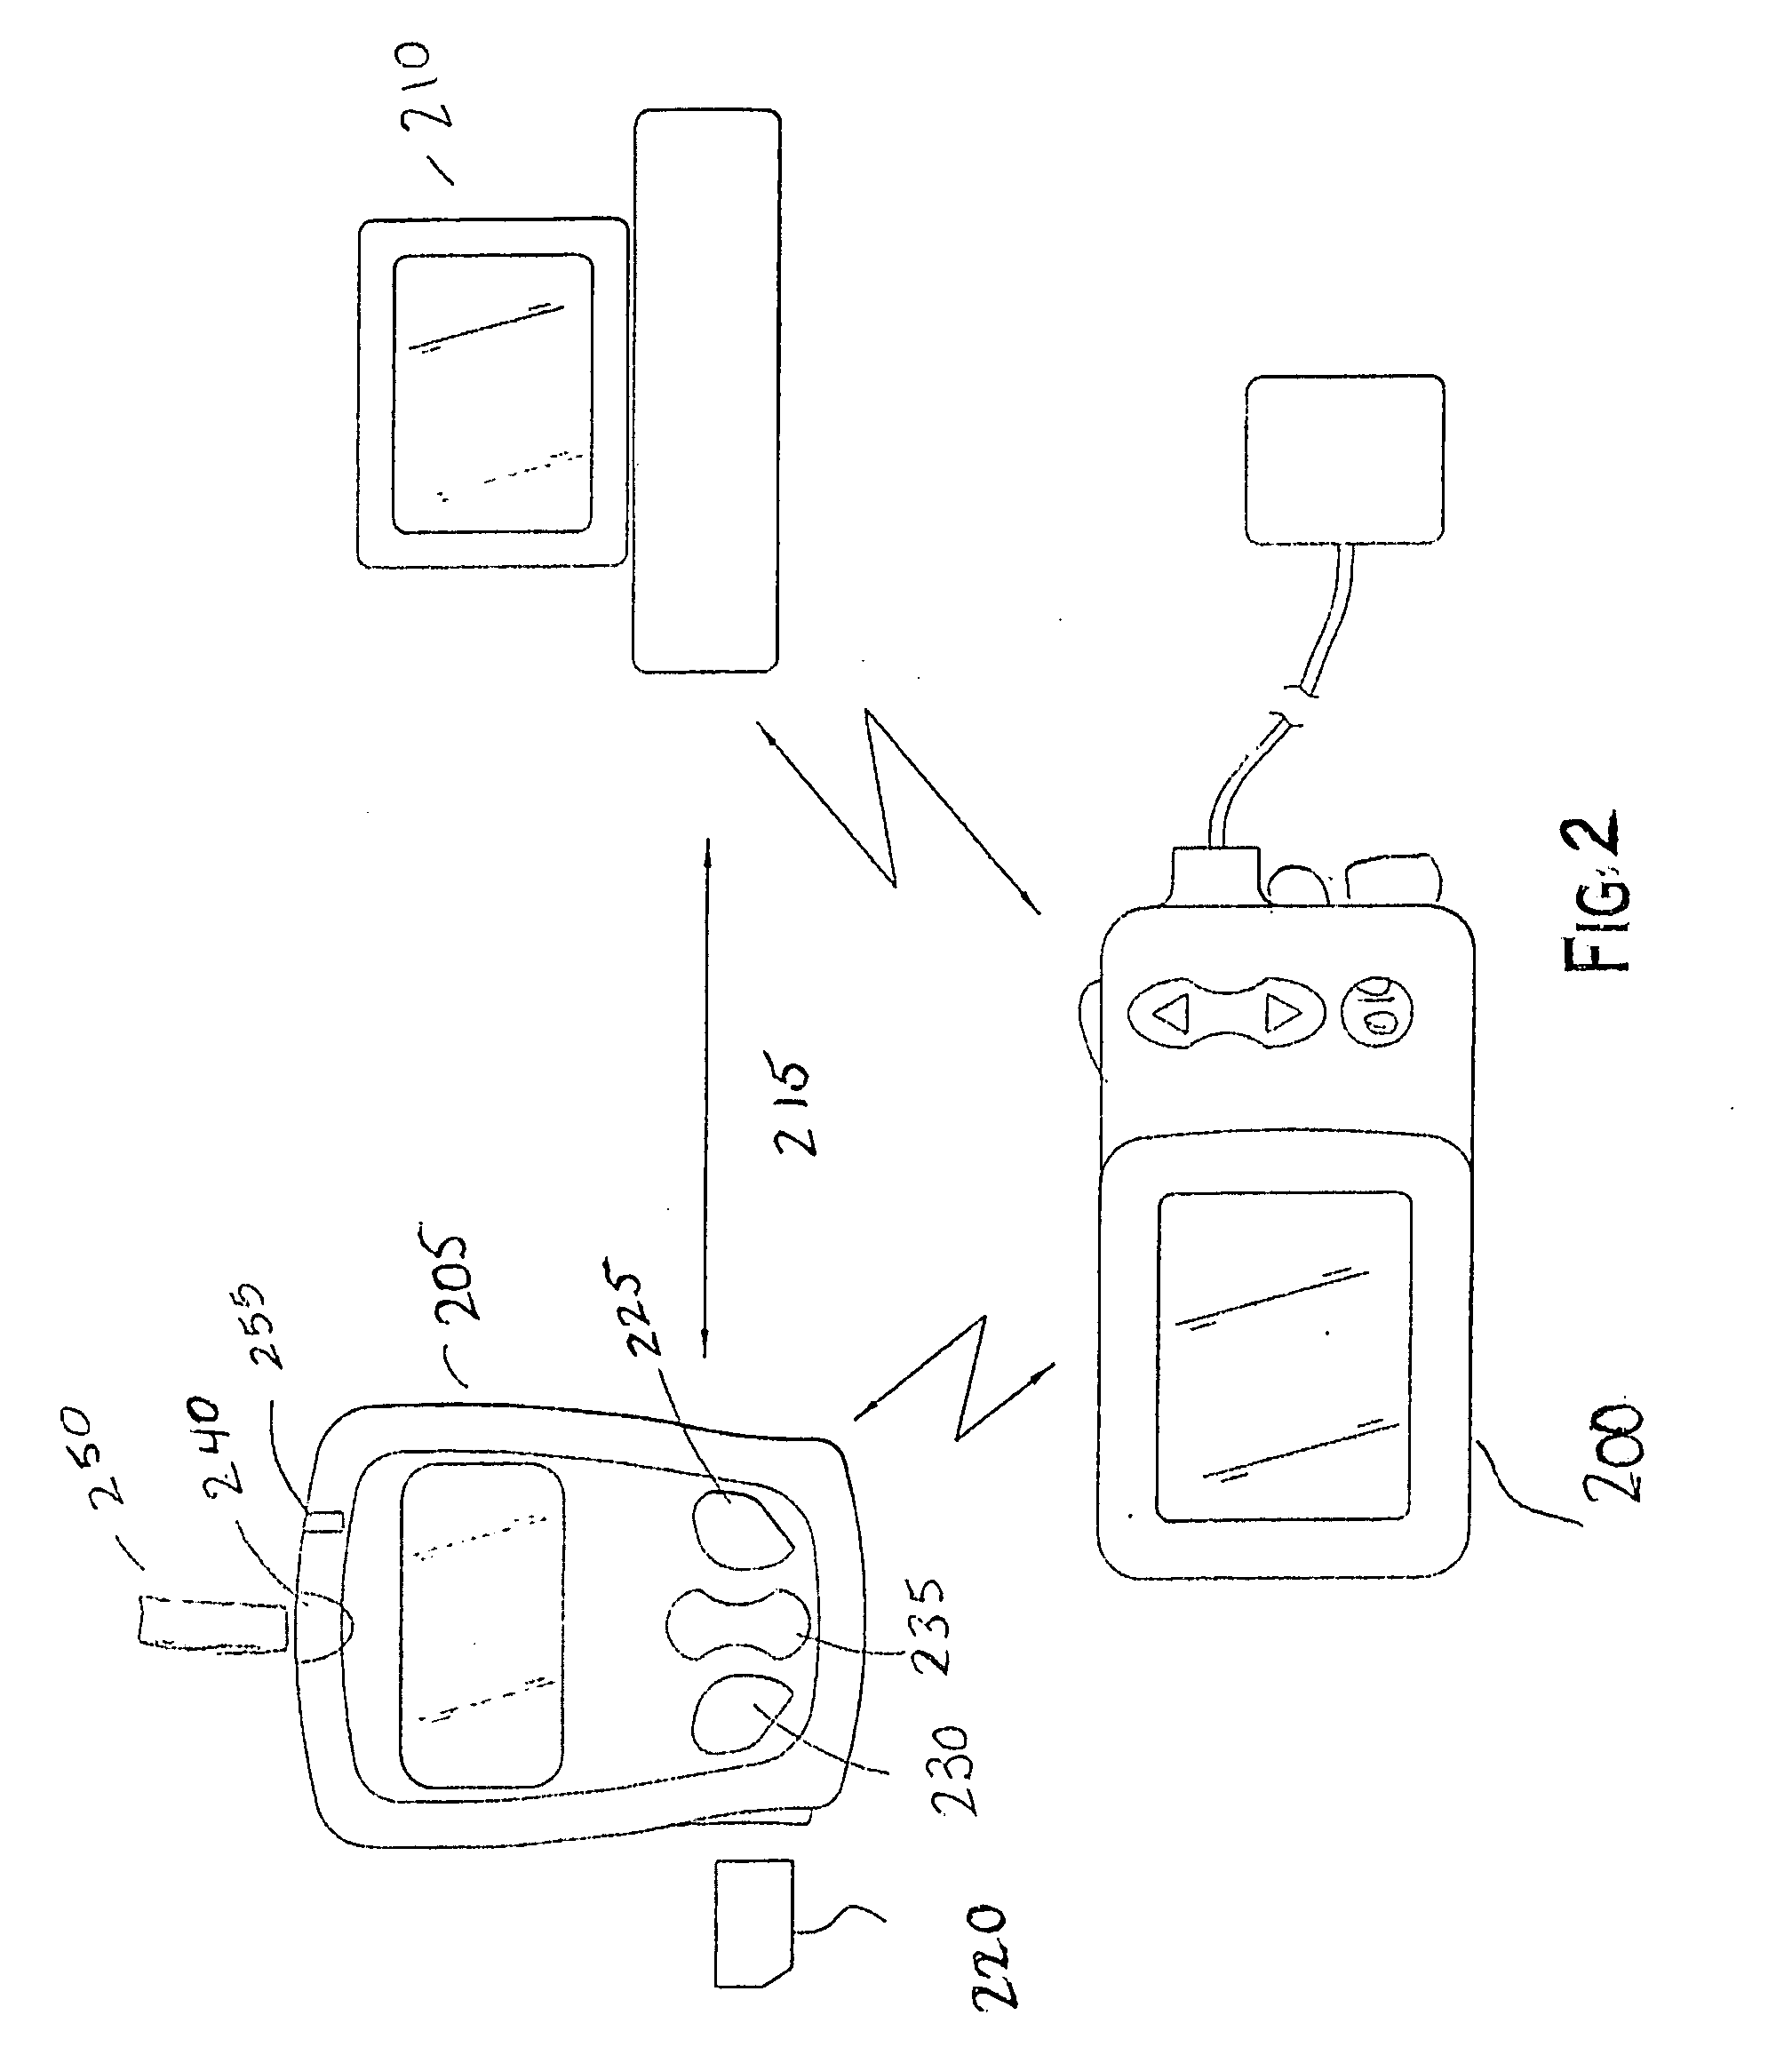 User Interface for Insulin Infusion Device